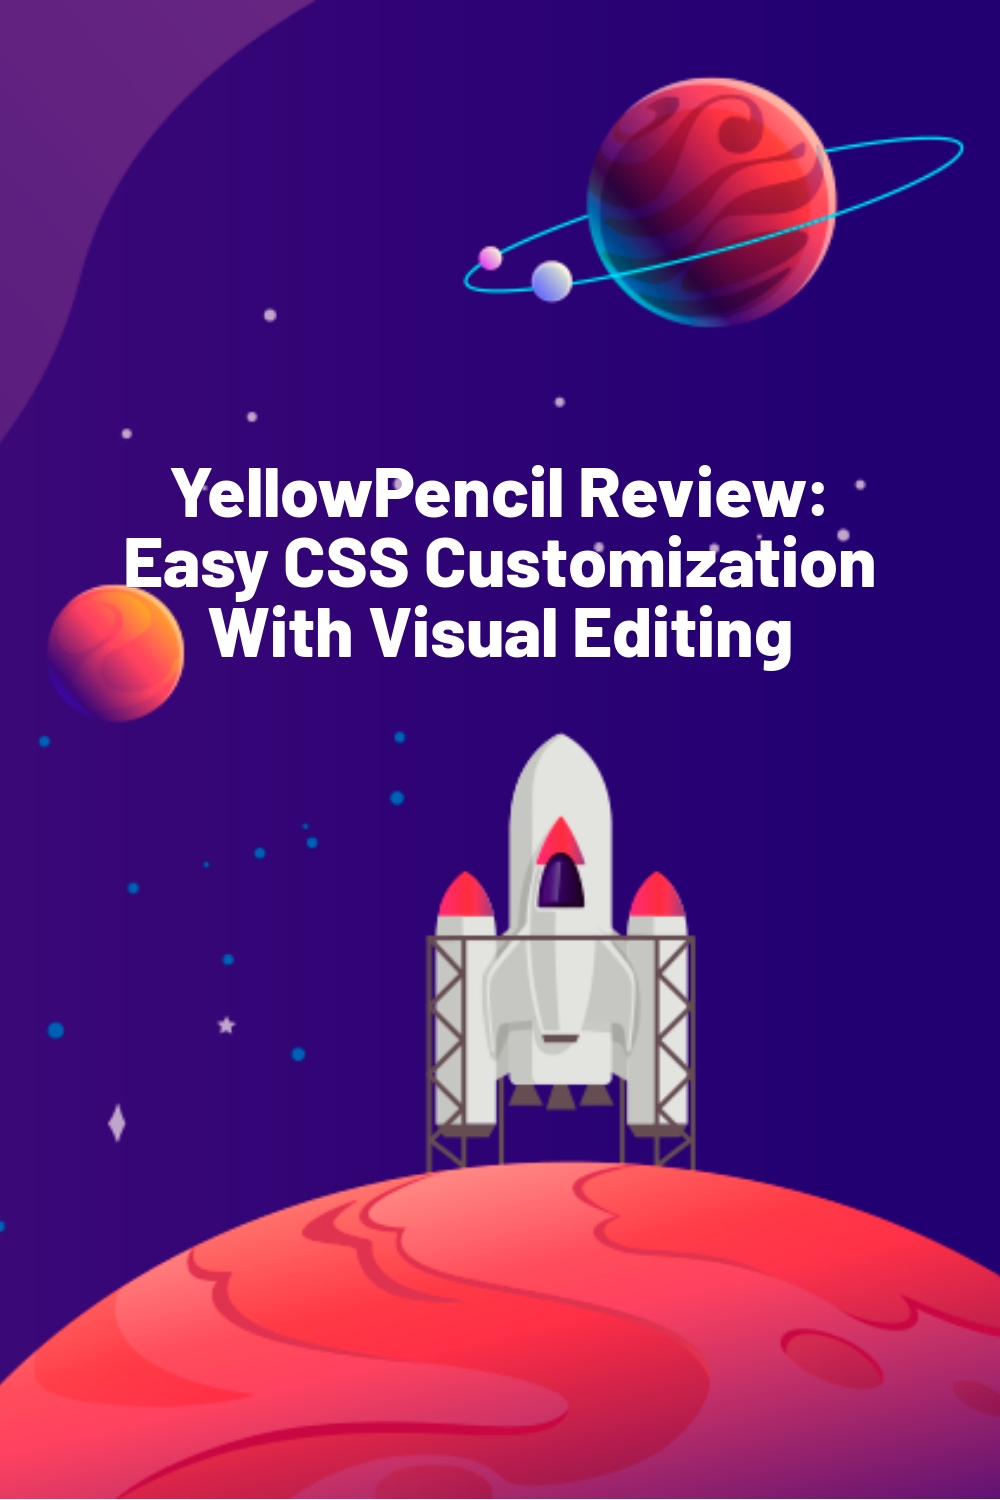 YellowPencil Review: Easy CSS Customization With Visual Editing